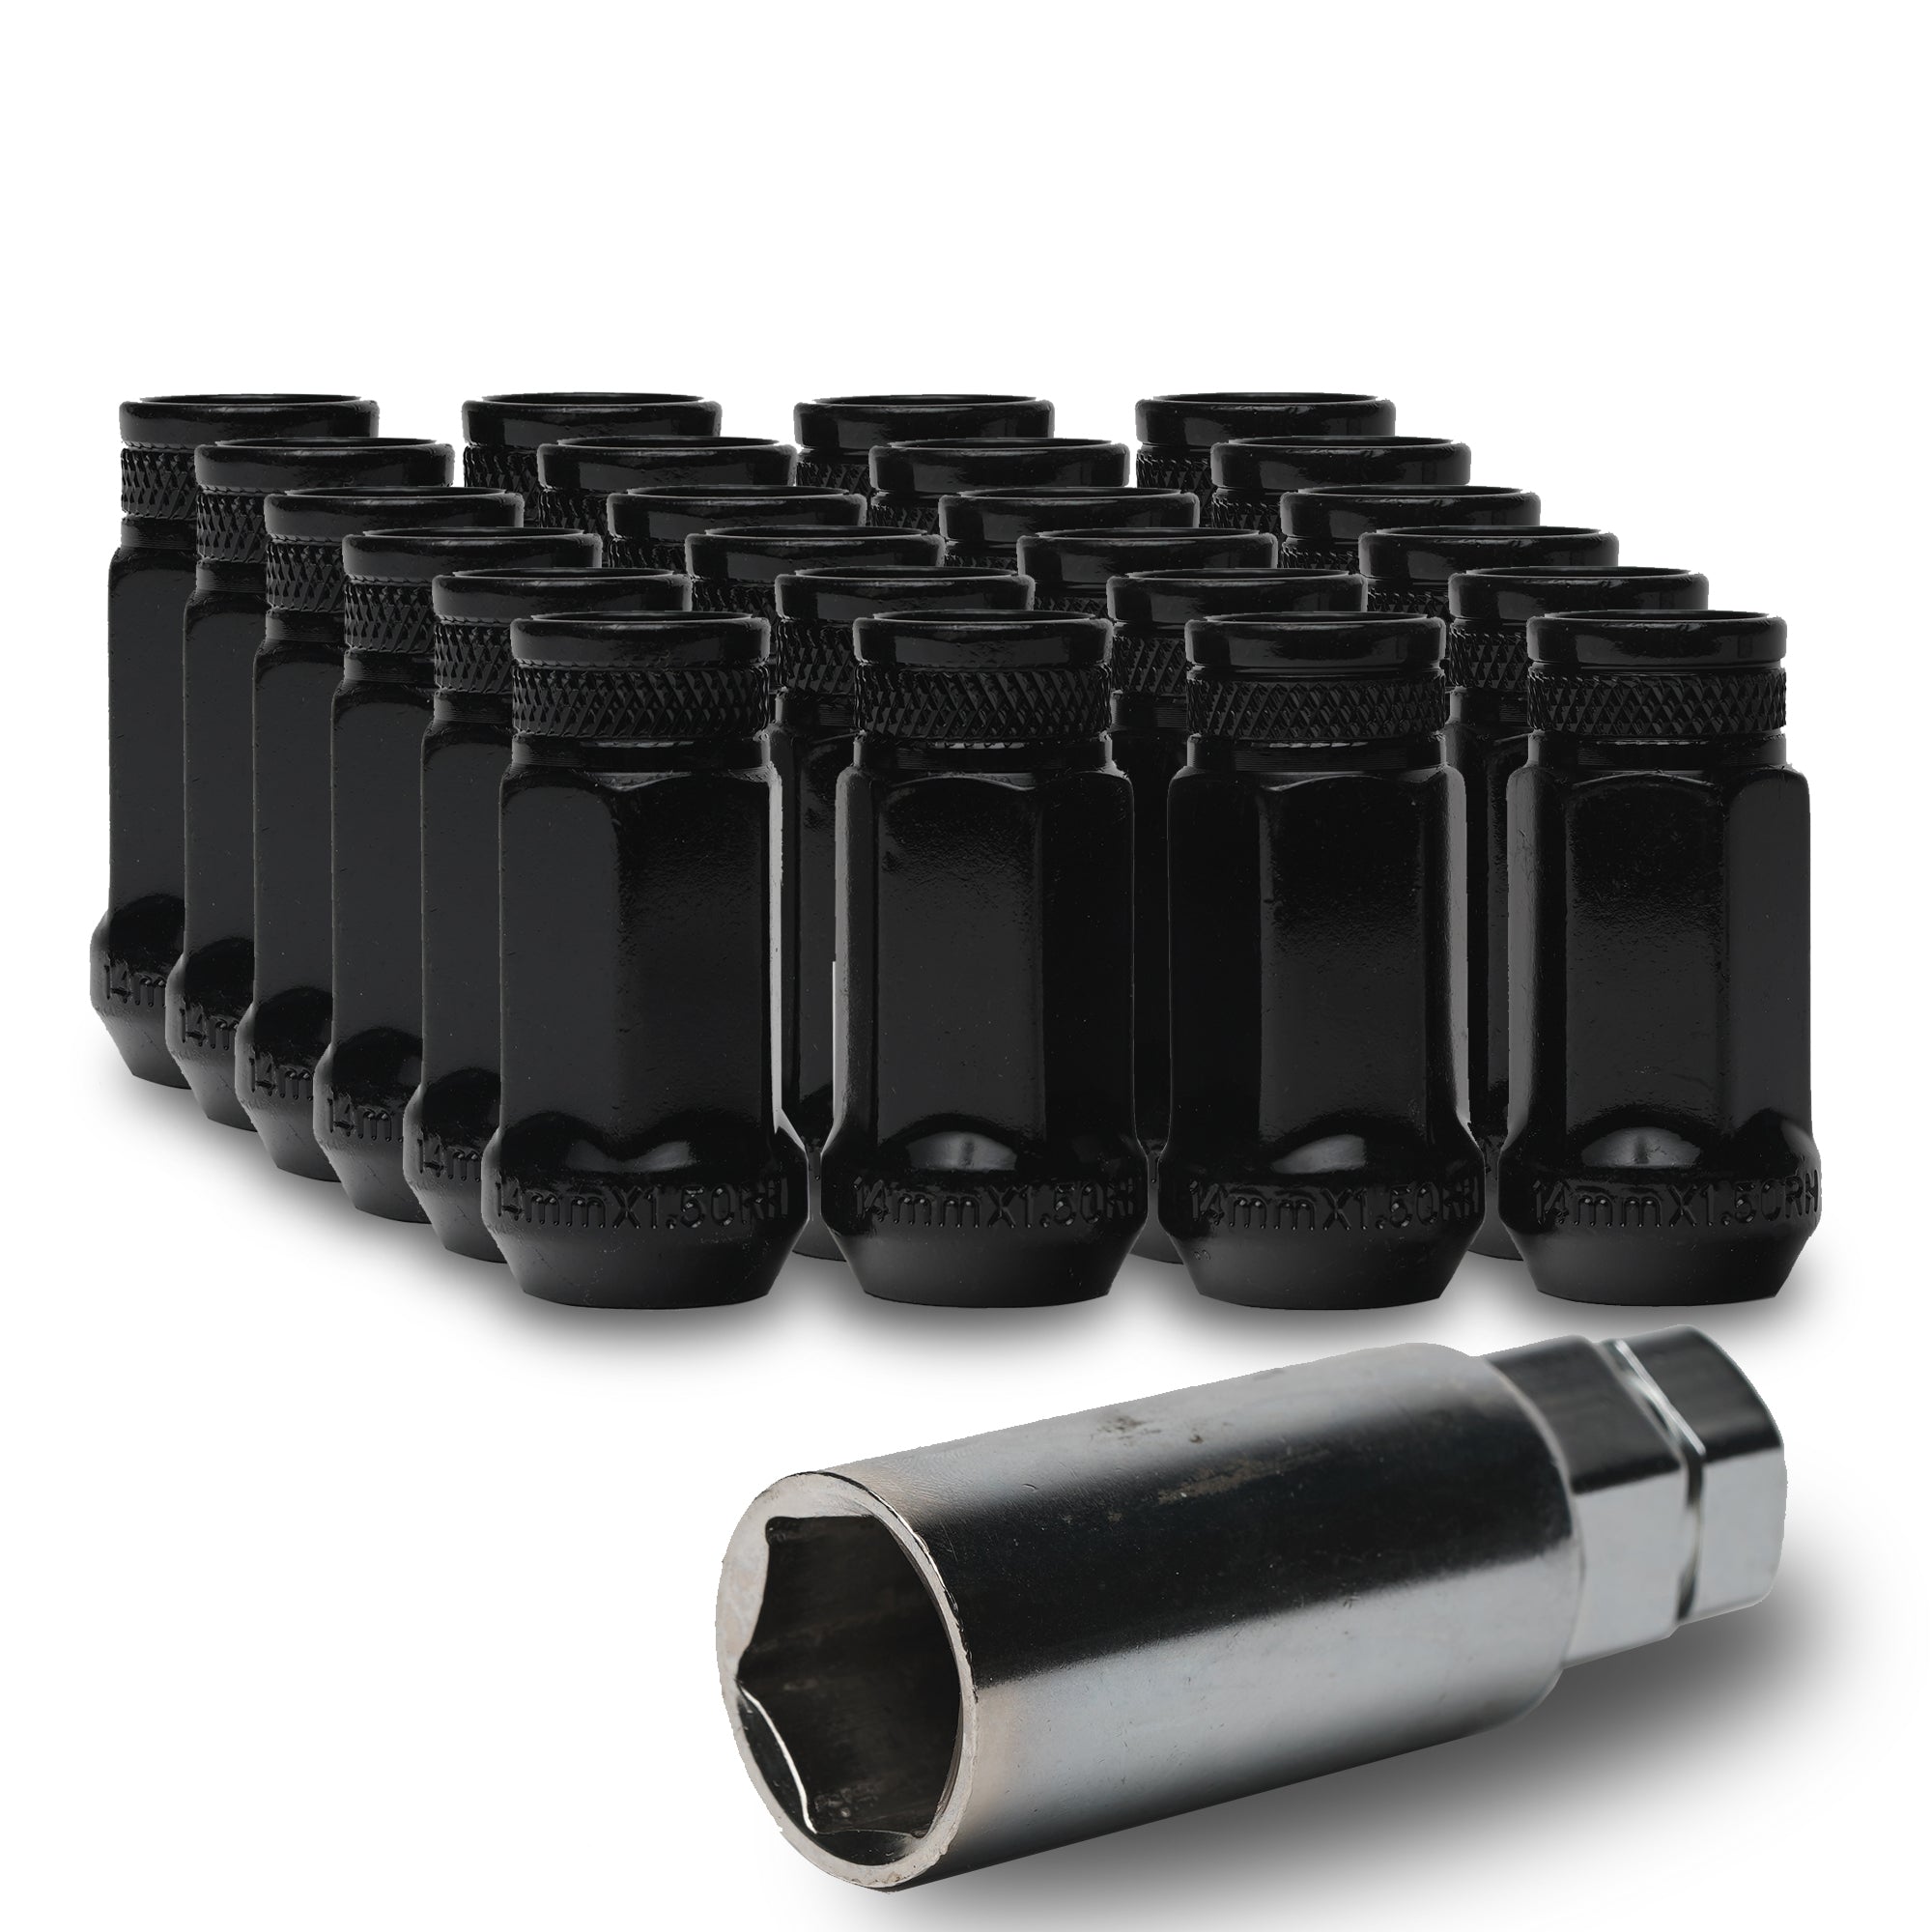 Hex Open End Lug Nuts (14x1.5) | Tundra, F150, Chevy, GMC